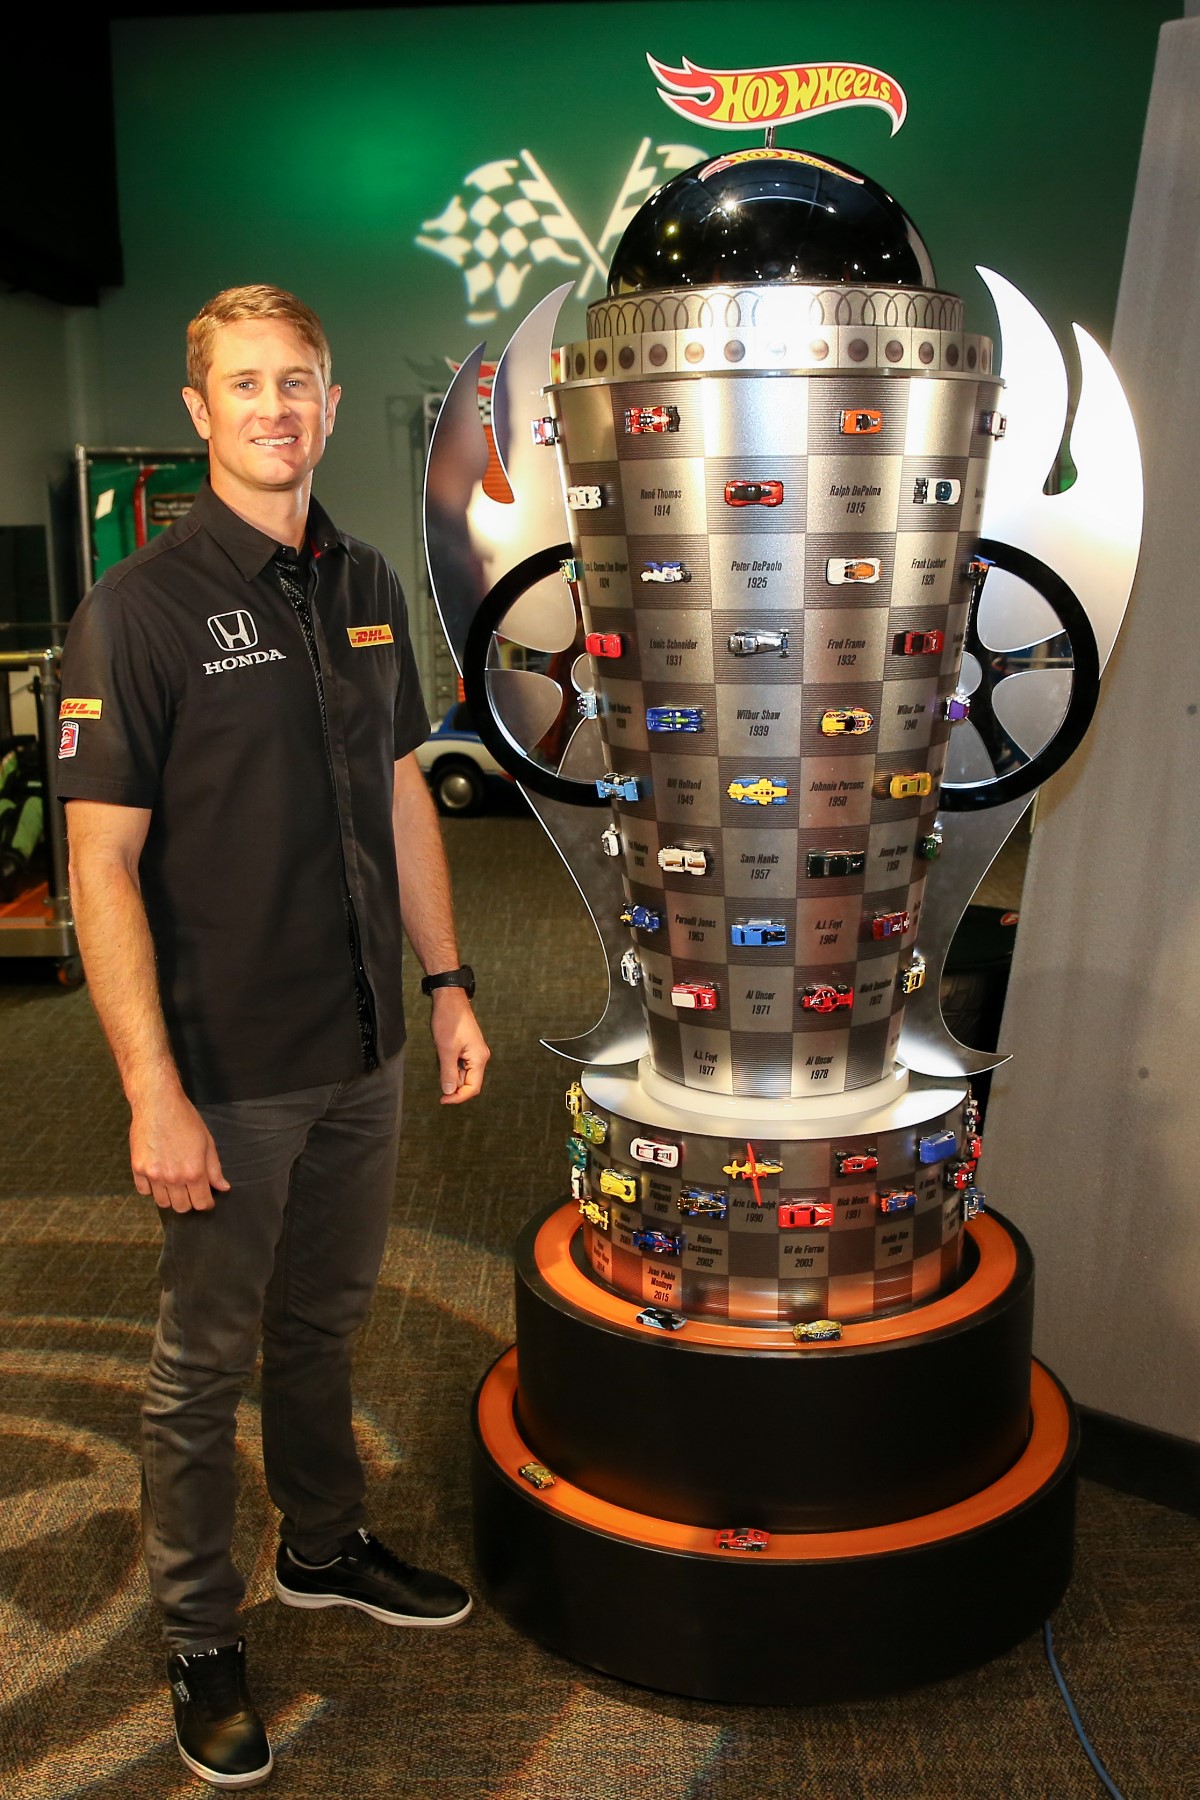 Ryan Hunter-Reay with the Hot Wheels replica of the Borg-Warner trophy